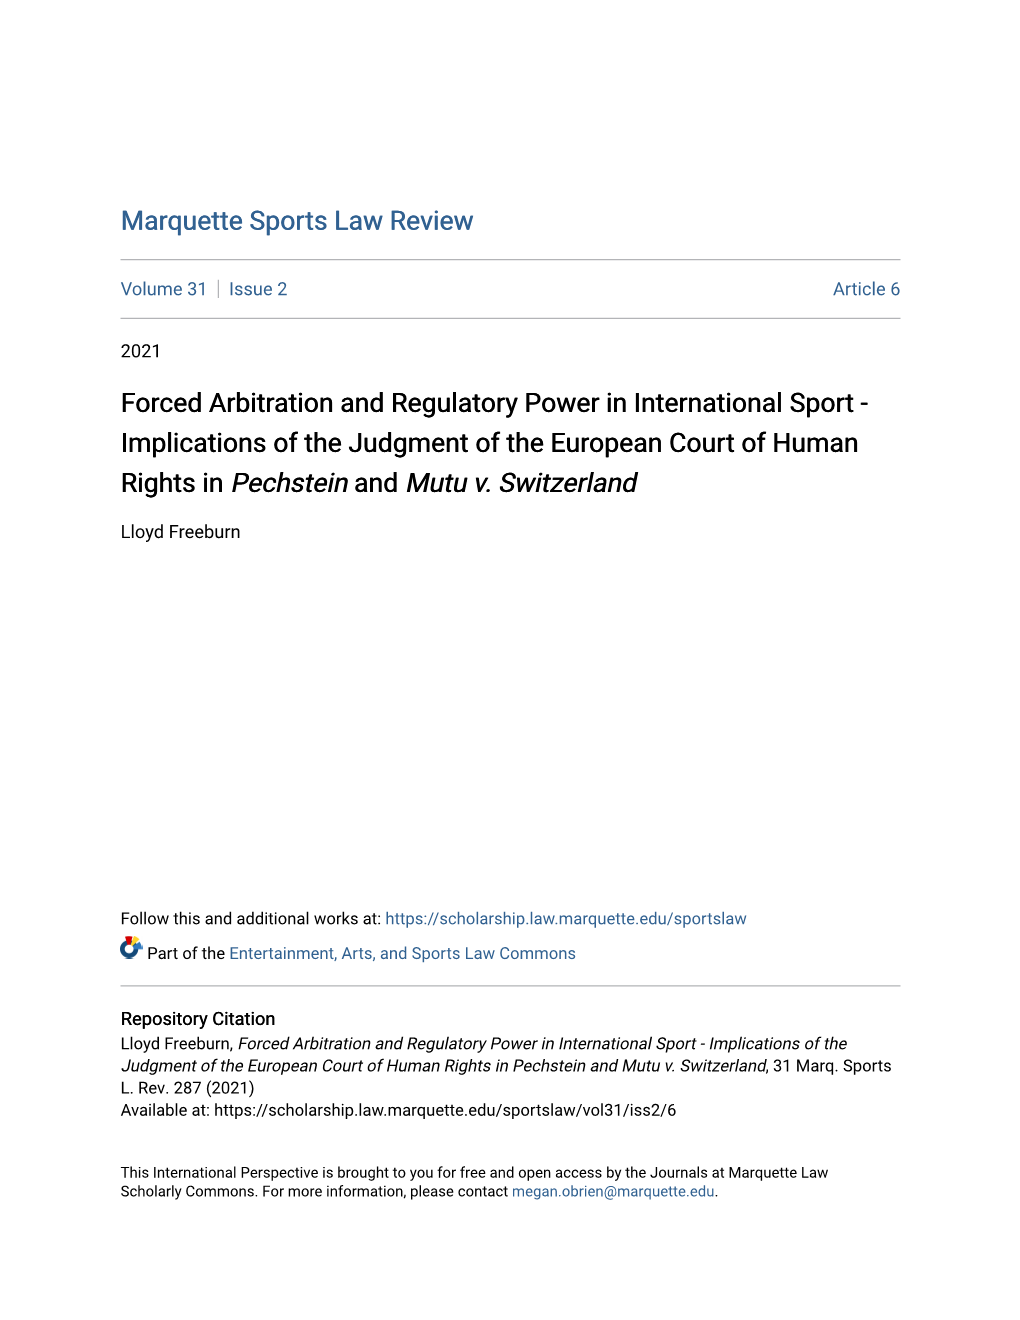 Forced Arbitration and Regulatory Power in International Sport - Implications of the Judgment of the European Court of Human Rights in Pechstein and Mutu V